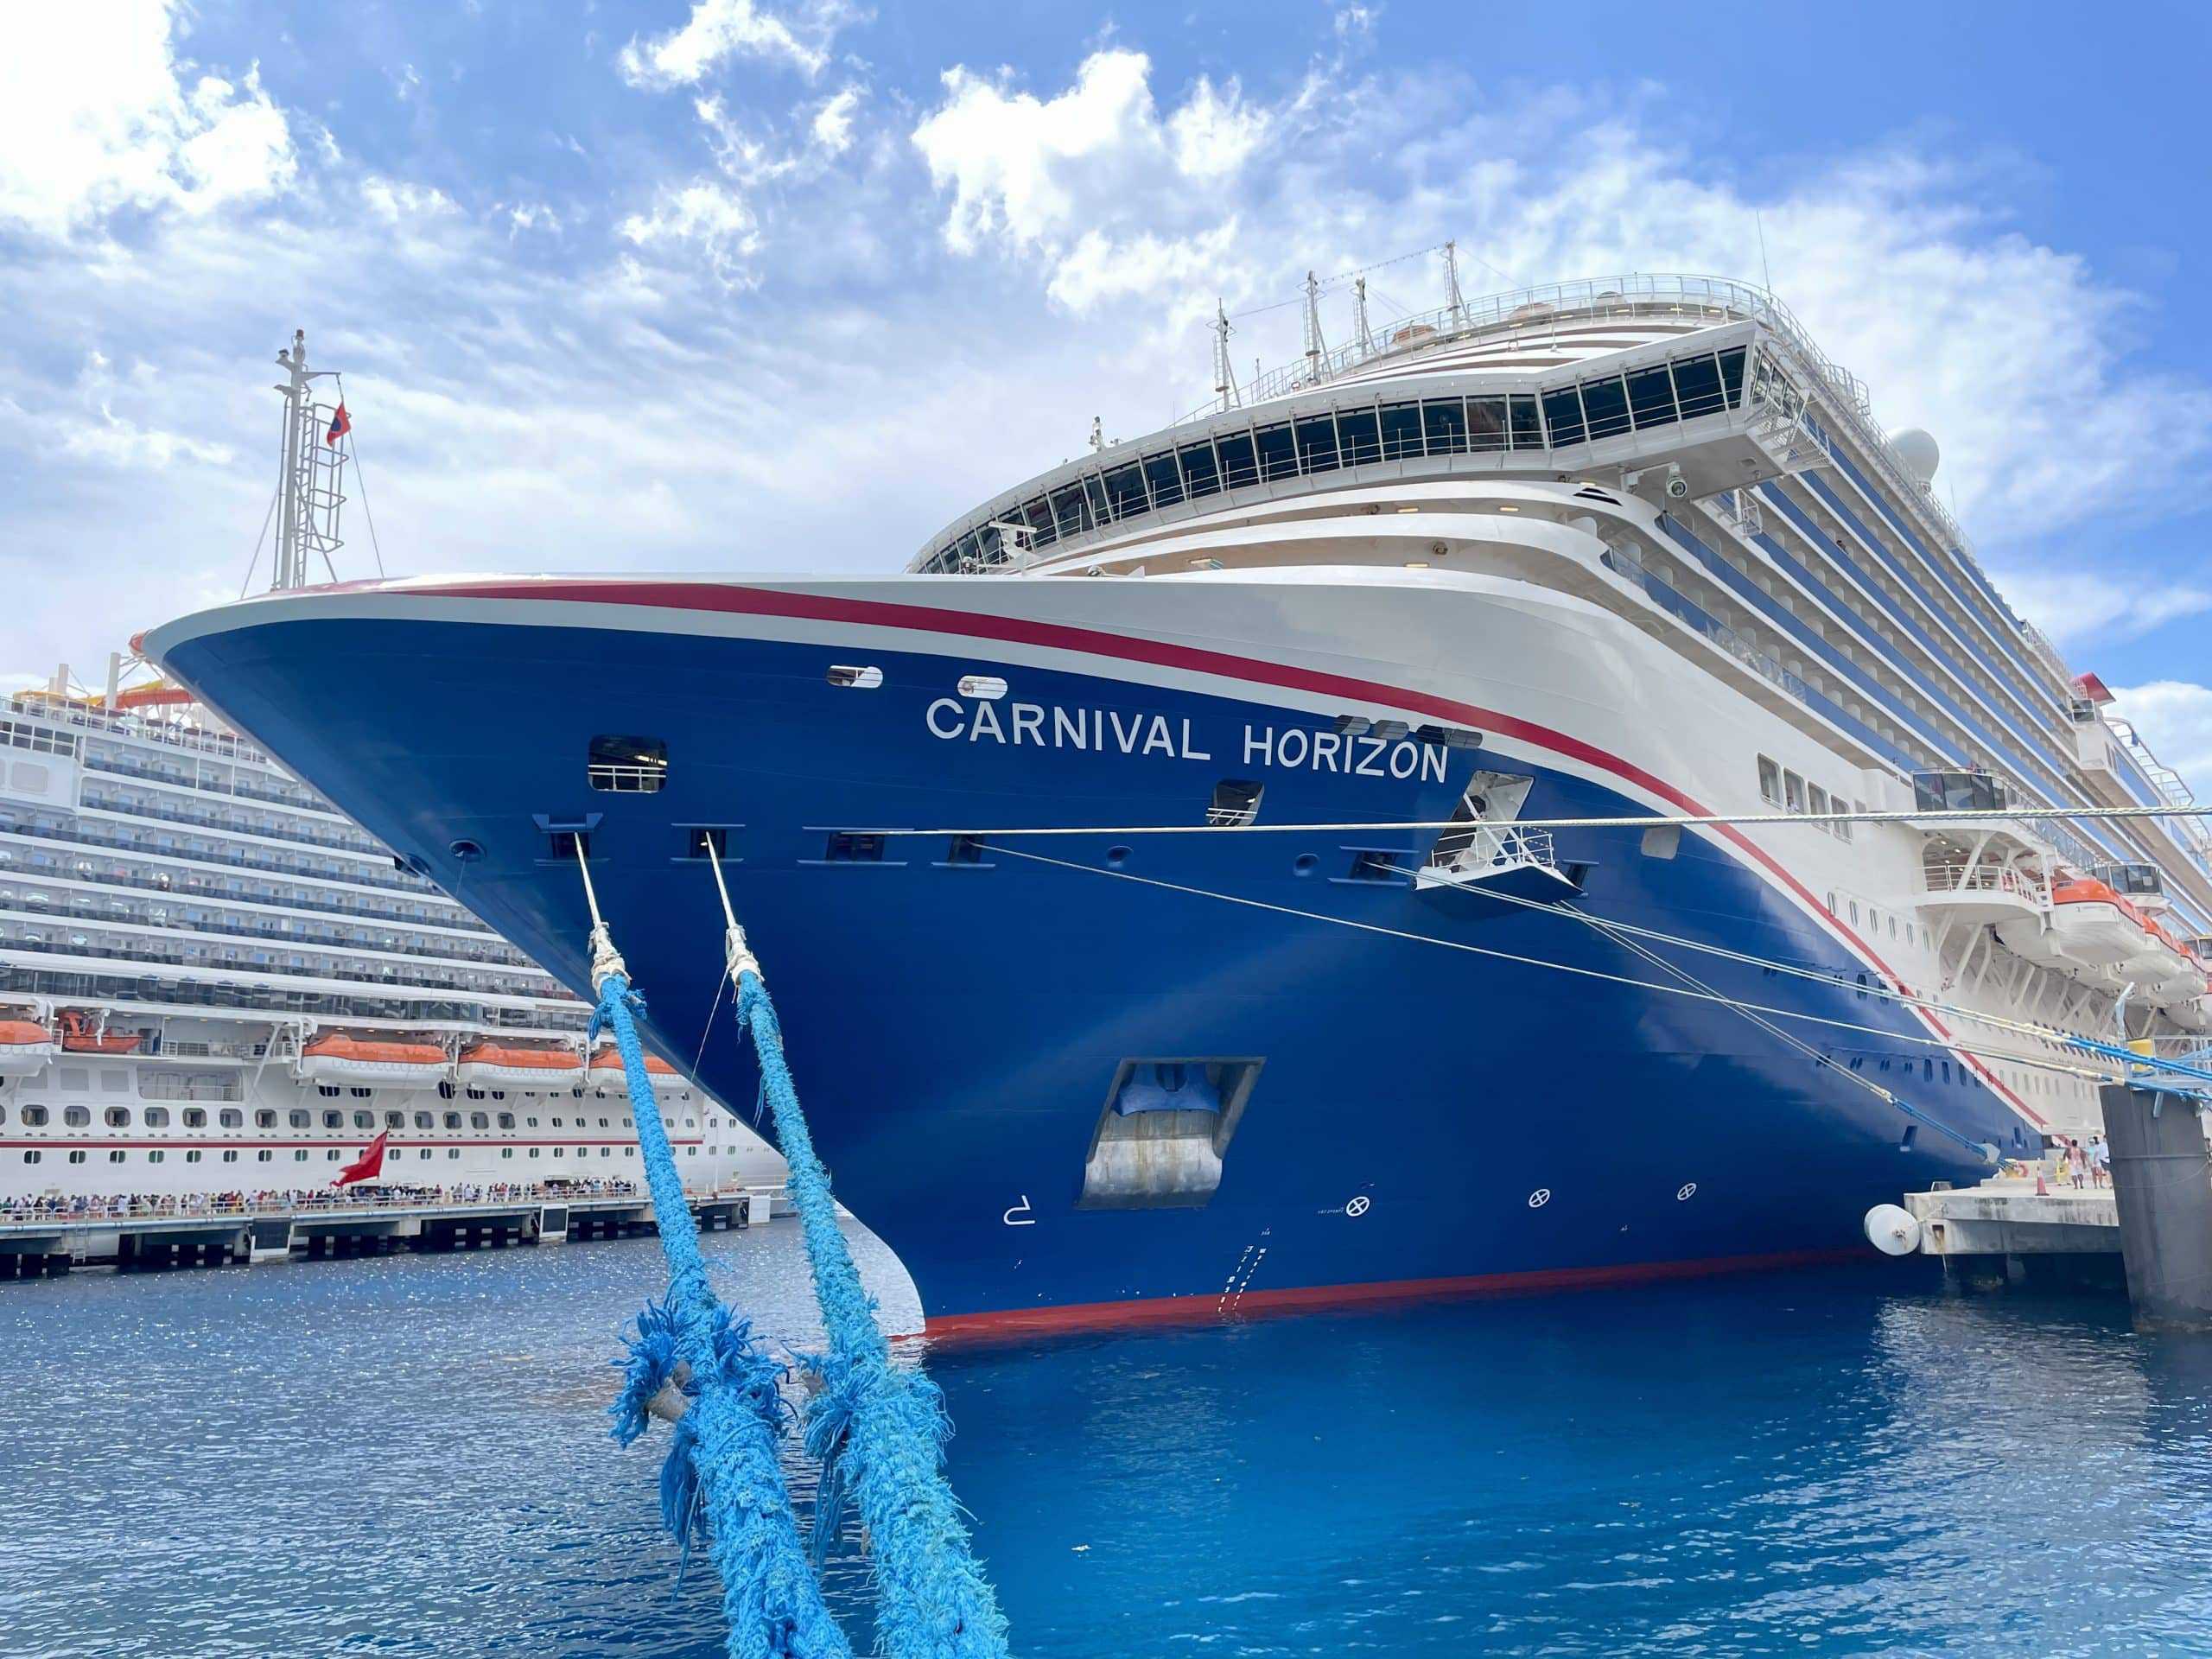 <p>The Carnival Horizon debuted in 2018 and has a capacity for up to 4000 guests. With a bold design and contemporary color scheme, the Horizon looks tasteful and exciting. However, reviews are mixed when it comes to just how much excitement is onboard this particular Carnival vessel.</p><p>Remember to scroll up and hit the ‘Follow’ button to keep up with the newest stories from Seattle Travel on your Microsoft Start feed or MSN homepage!</p>